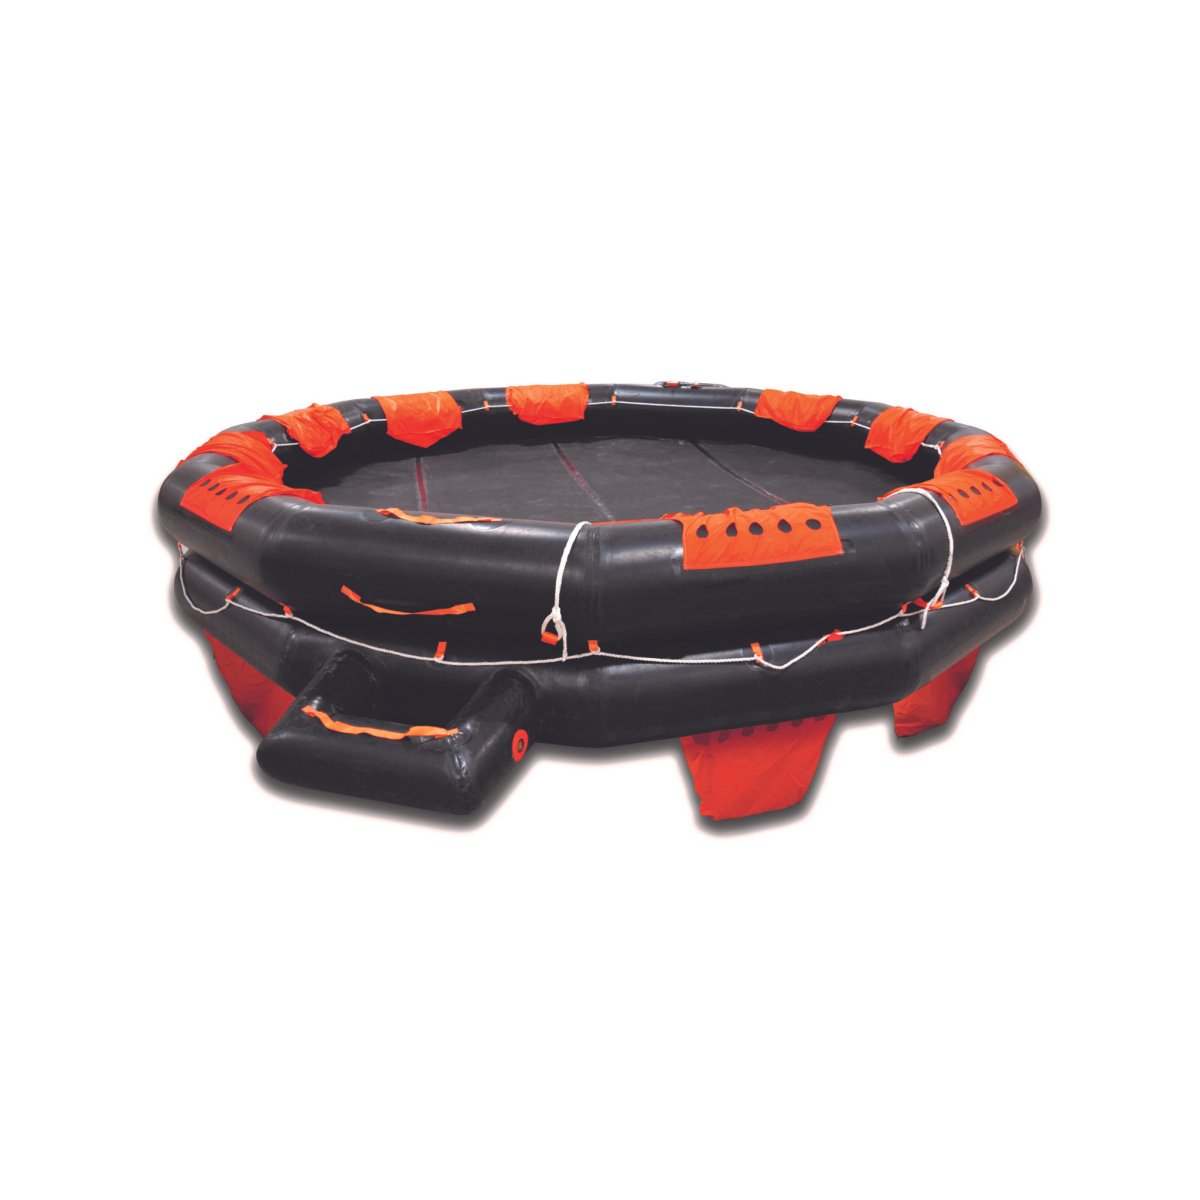 Revere USCG Approved IBA, 25-50 Person with Cradle - Life Raft Professionals